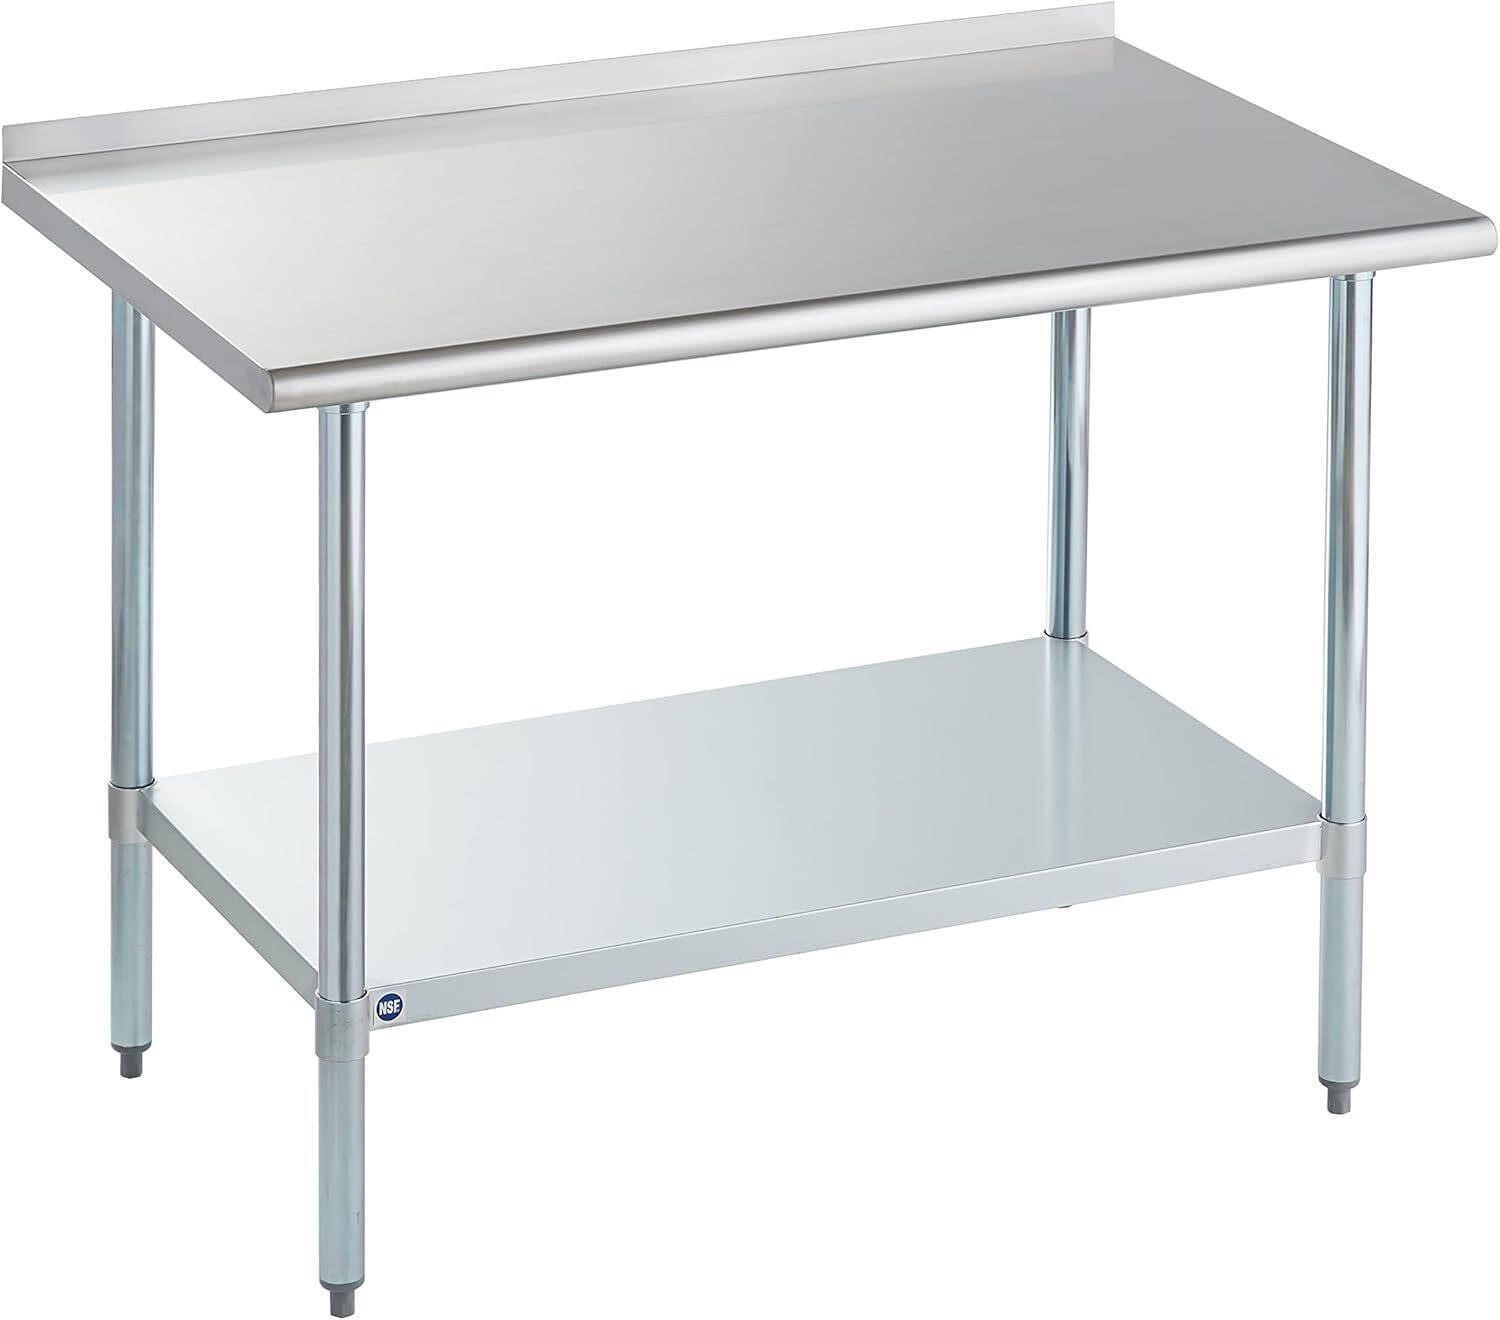 ROCKPOINT Stainless Steel Table 48x30 Inches  NSF